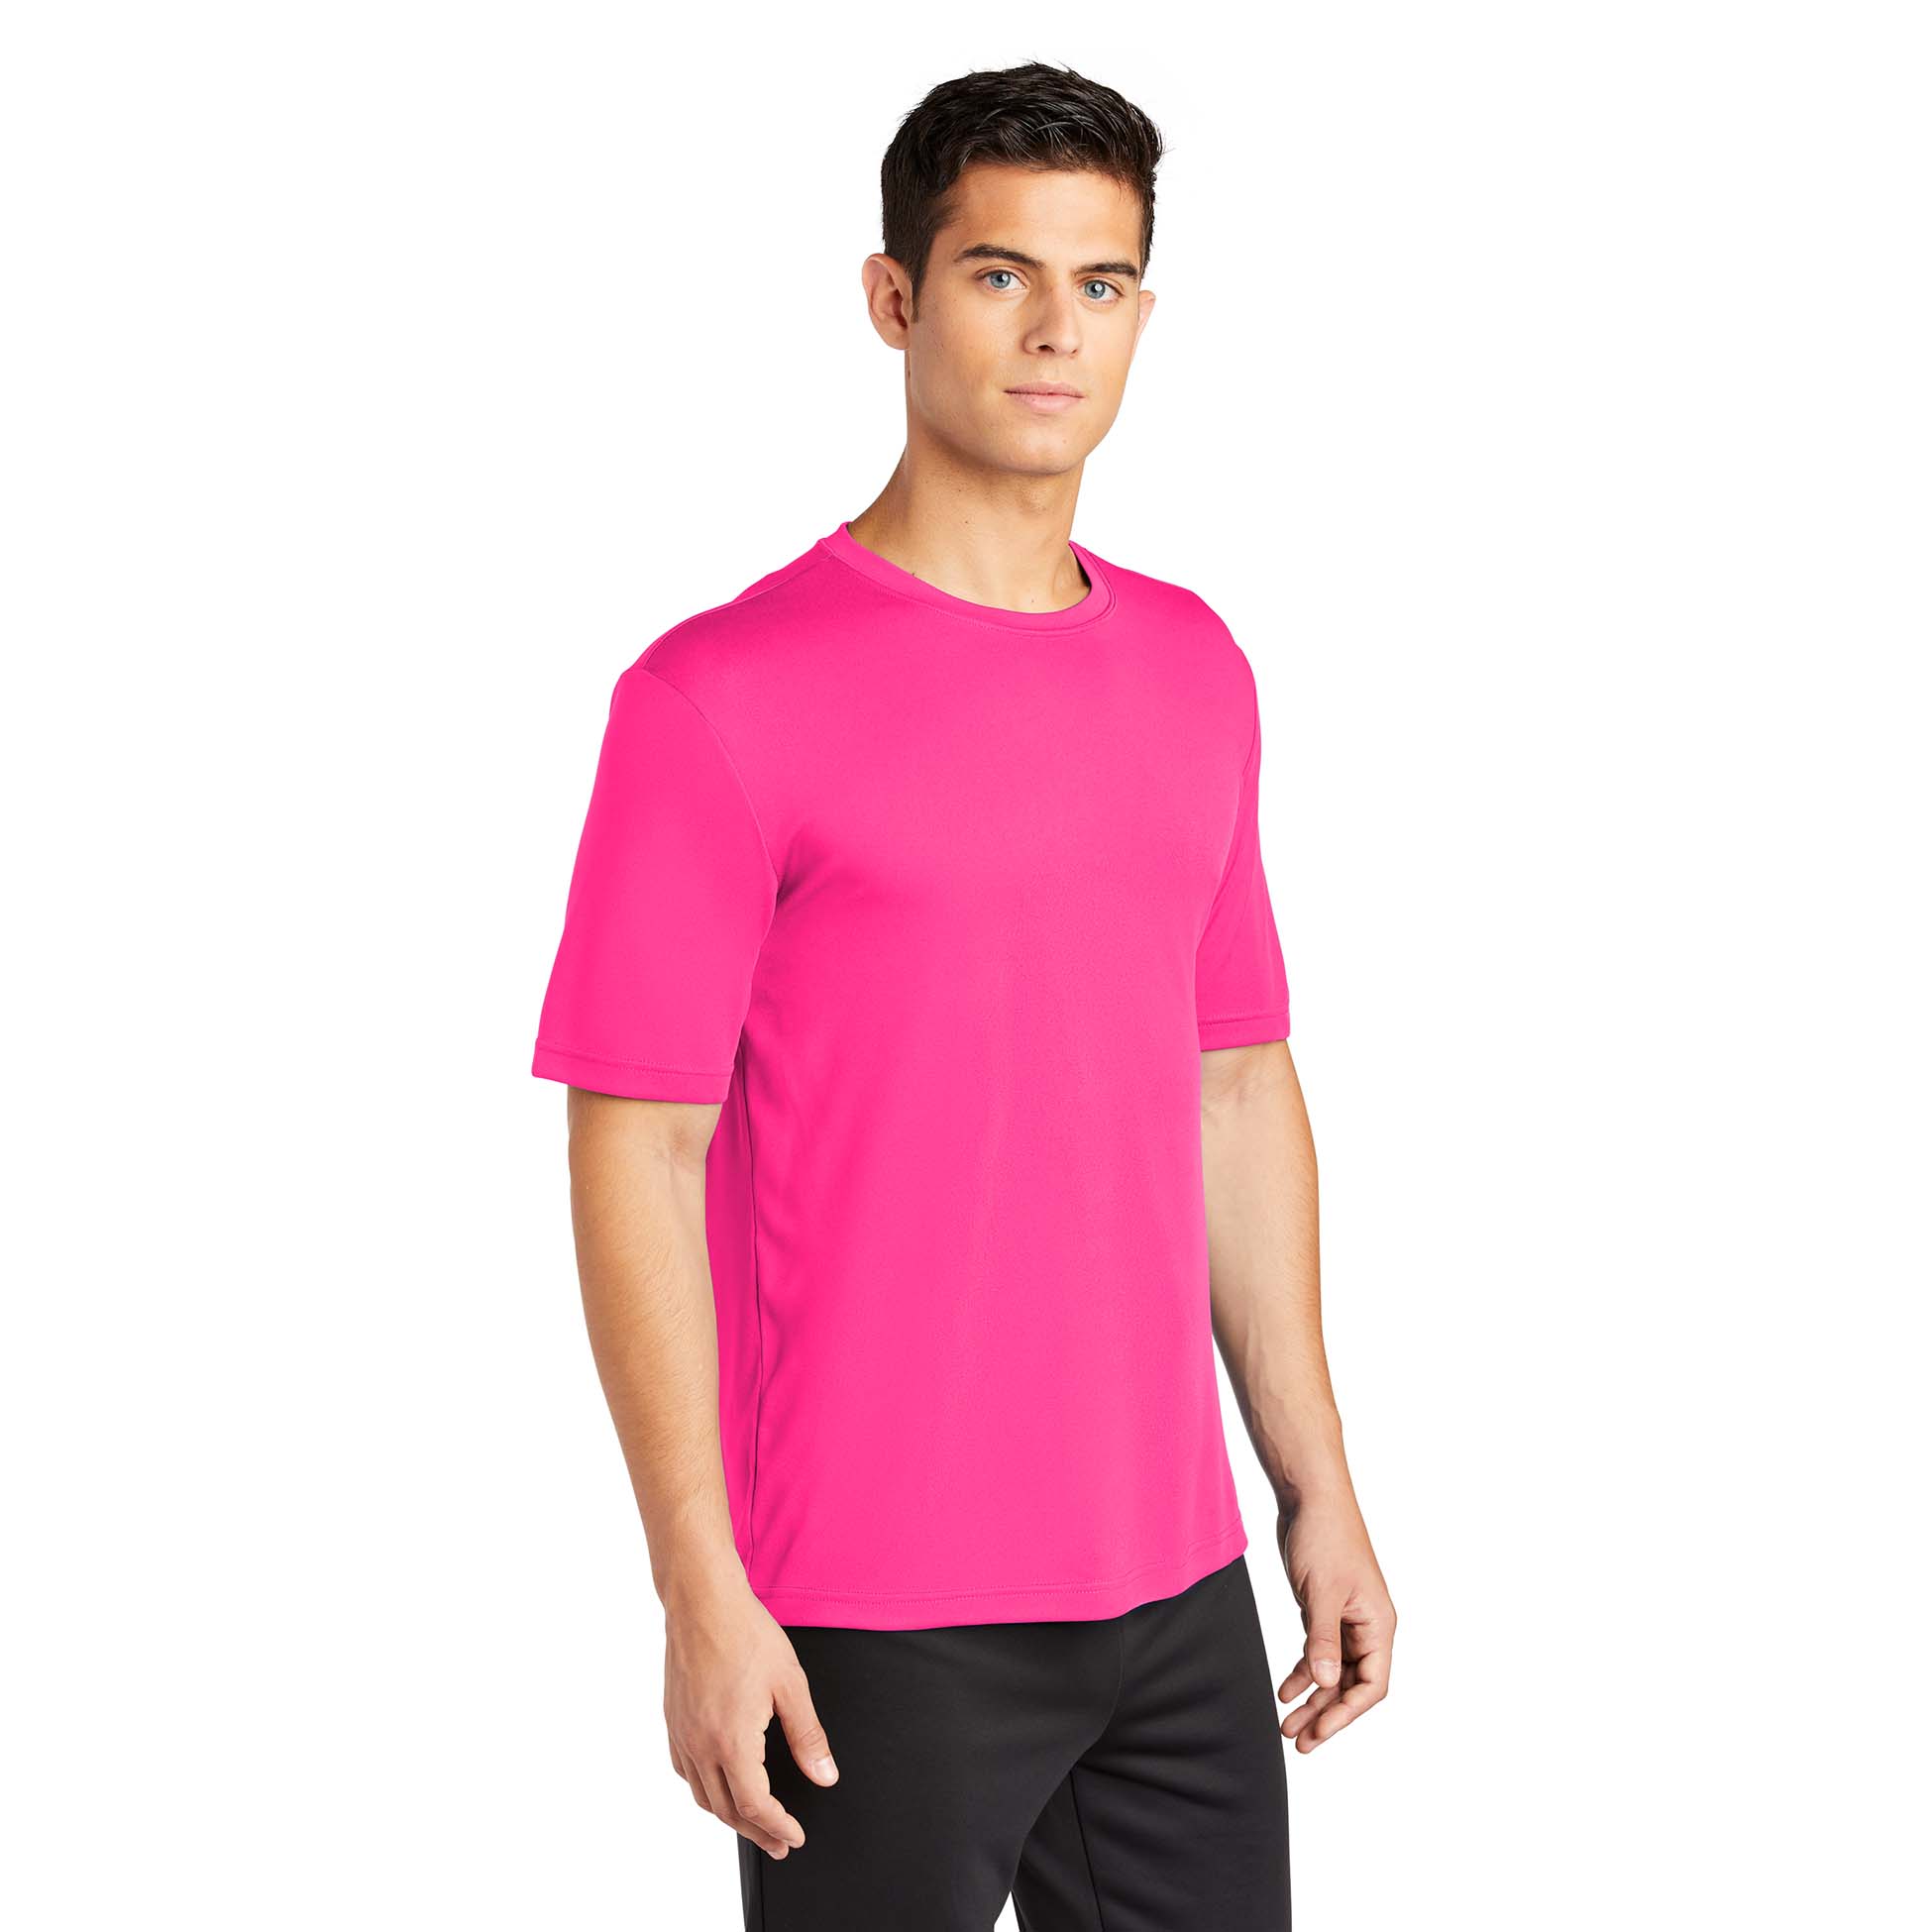 Tee Pink Full | ST350 Source PosiCharge Competitor Neon - Sport-Tek